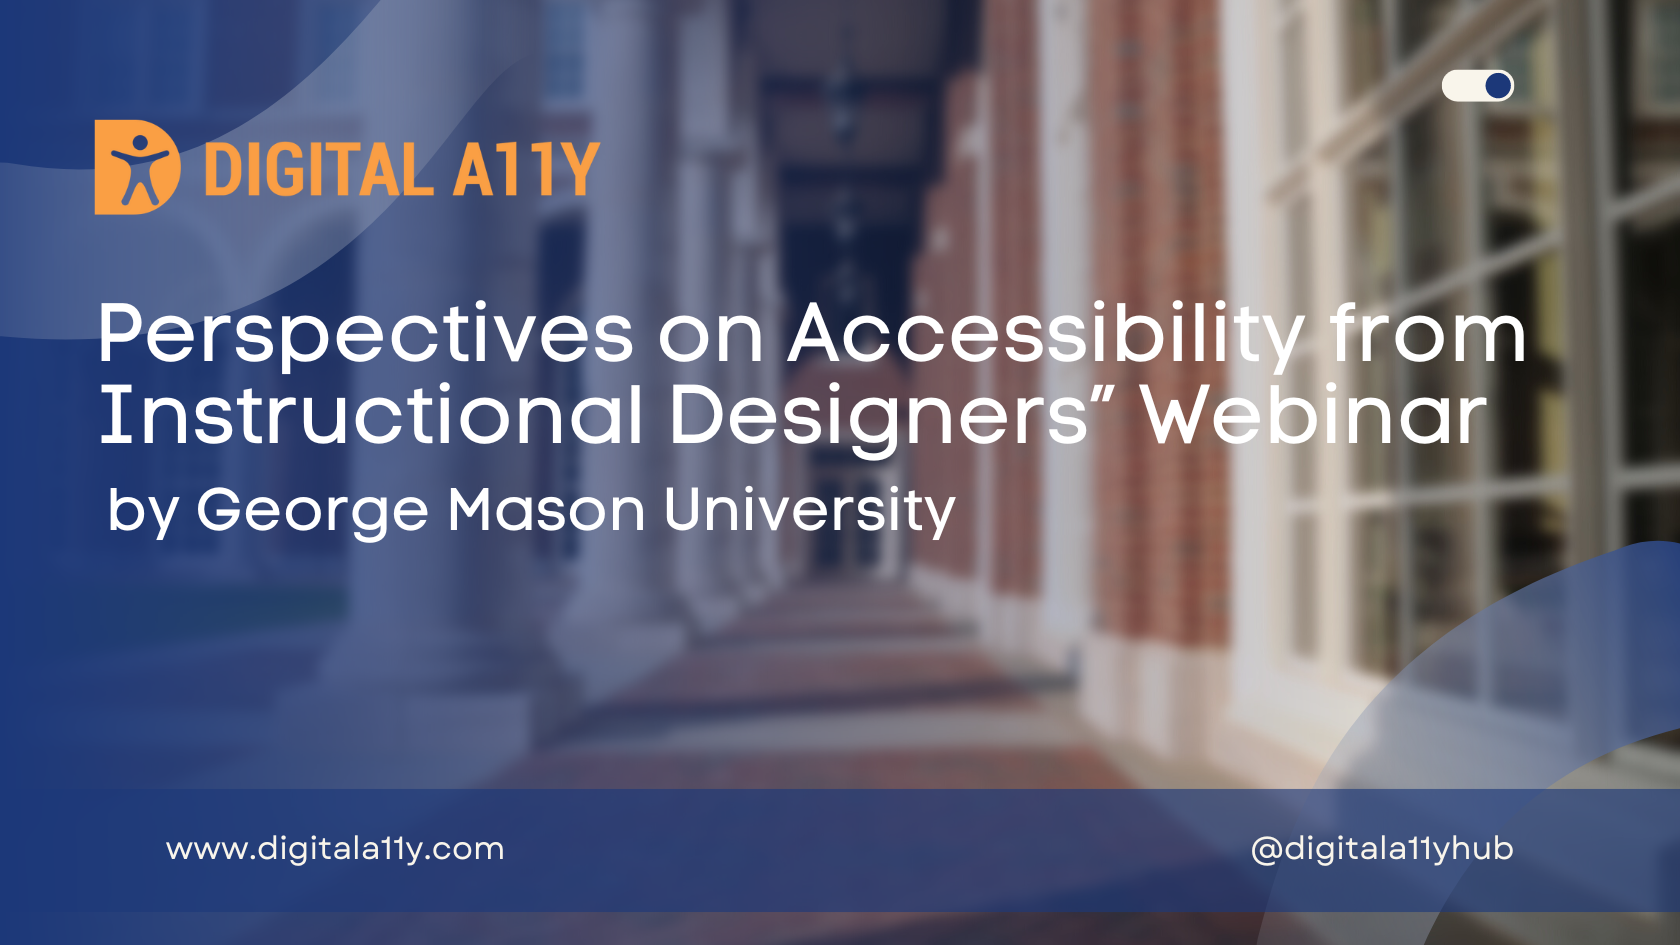 Perspectives on Accessibility from Instructional Designers” Webinar by George Mason University